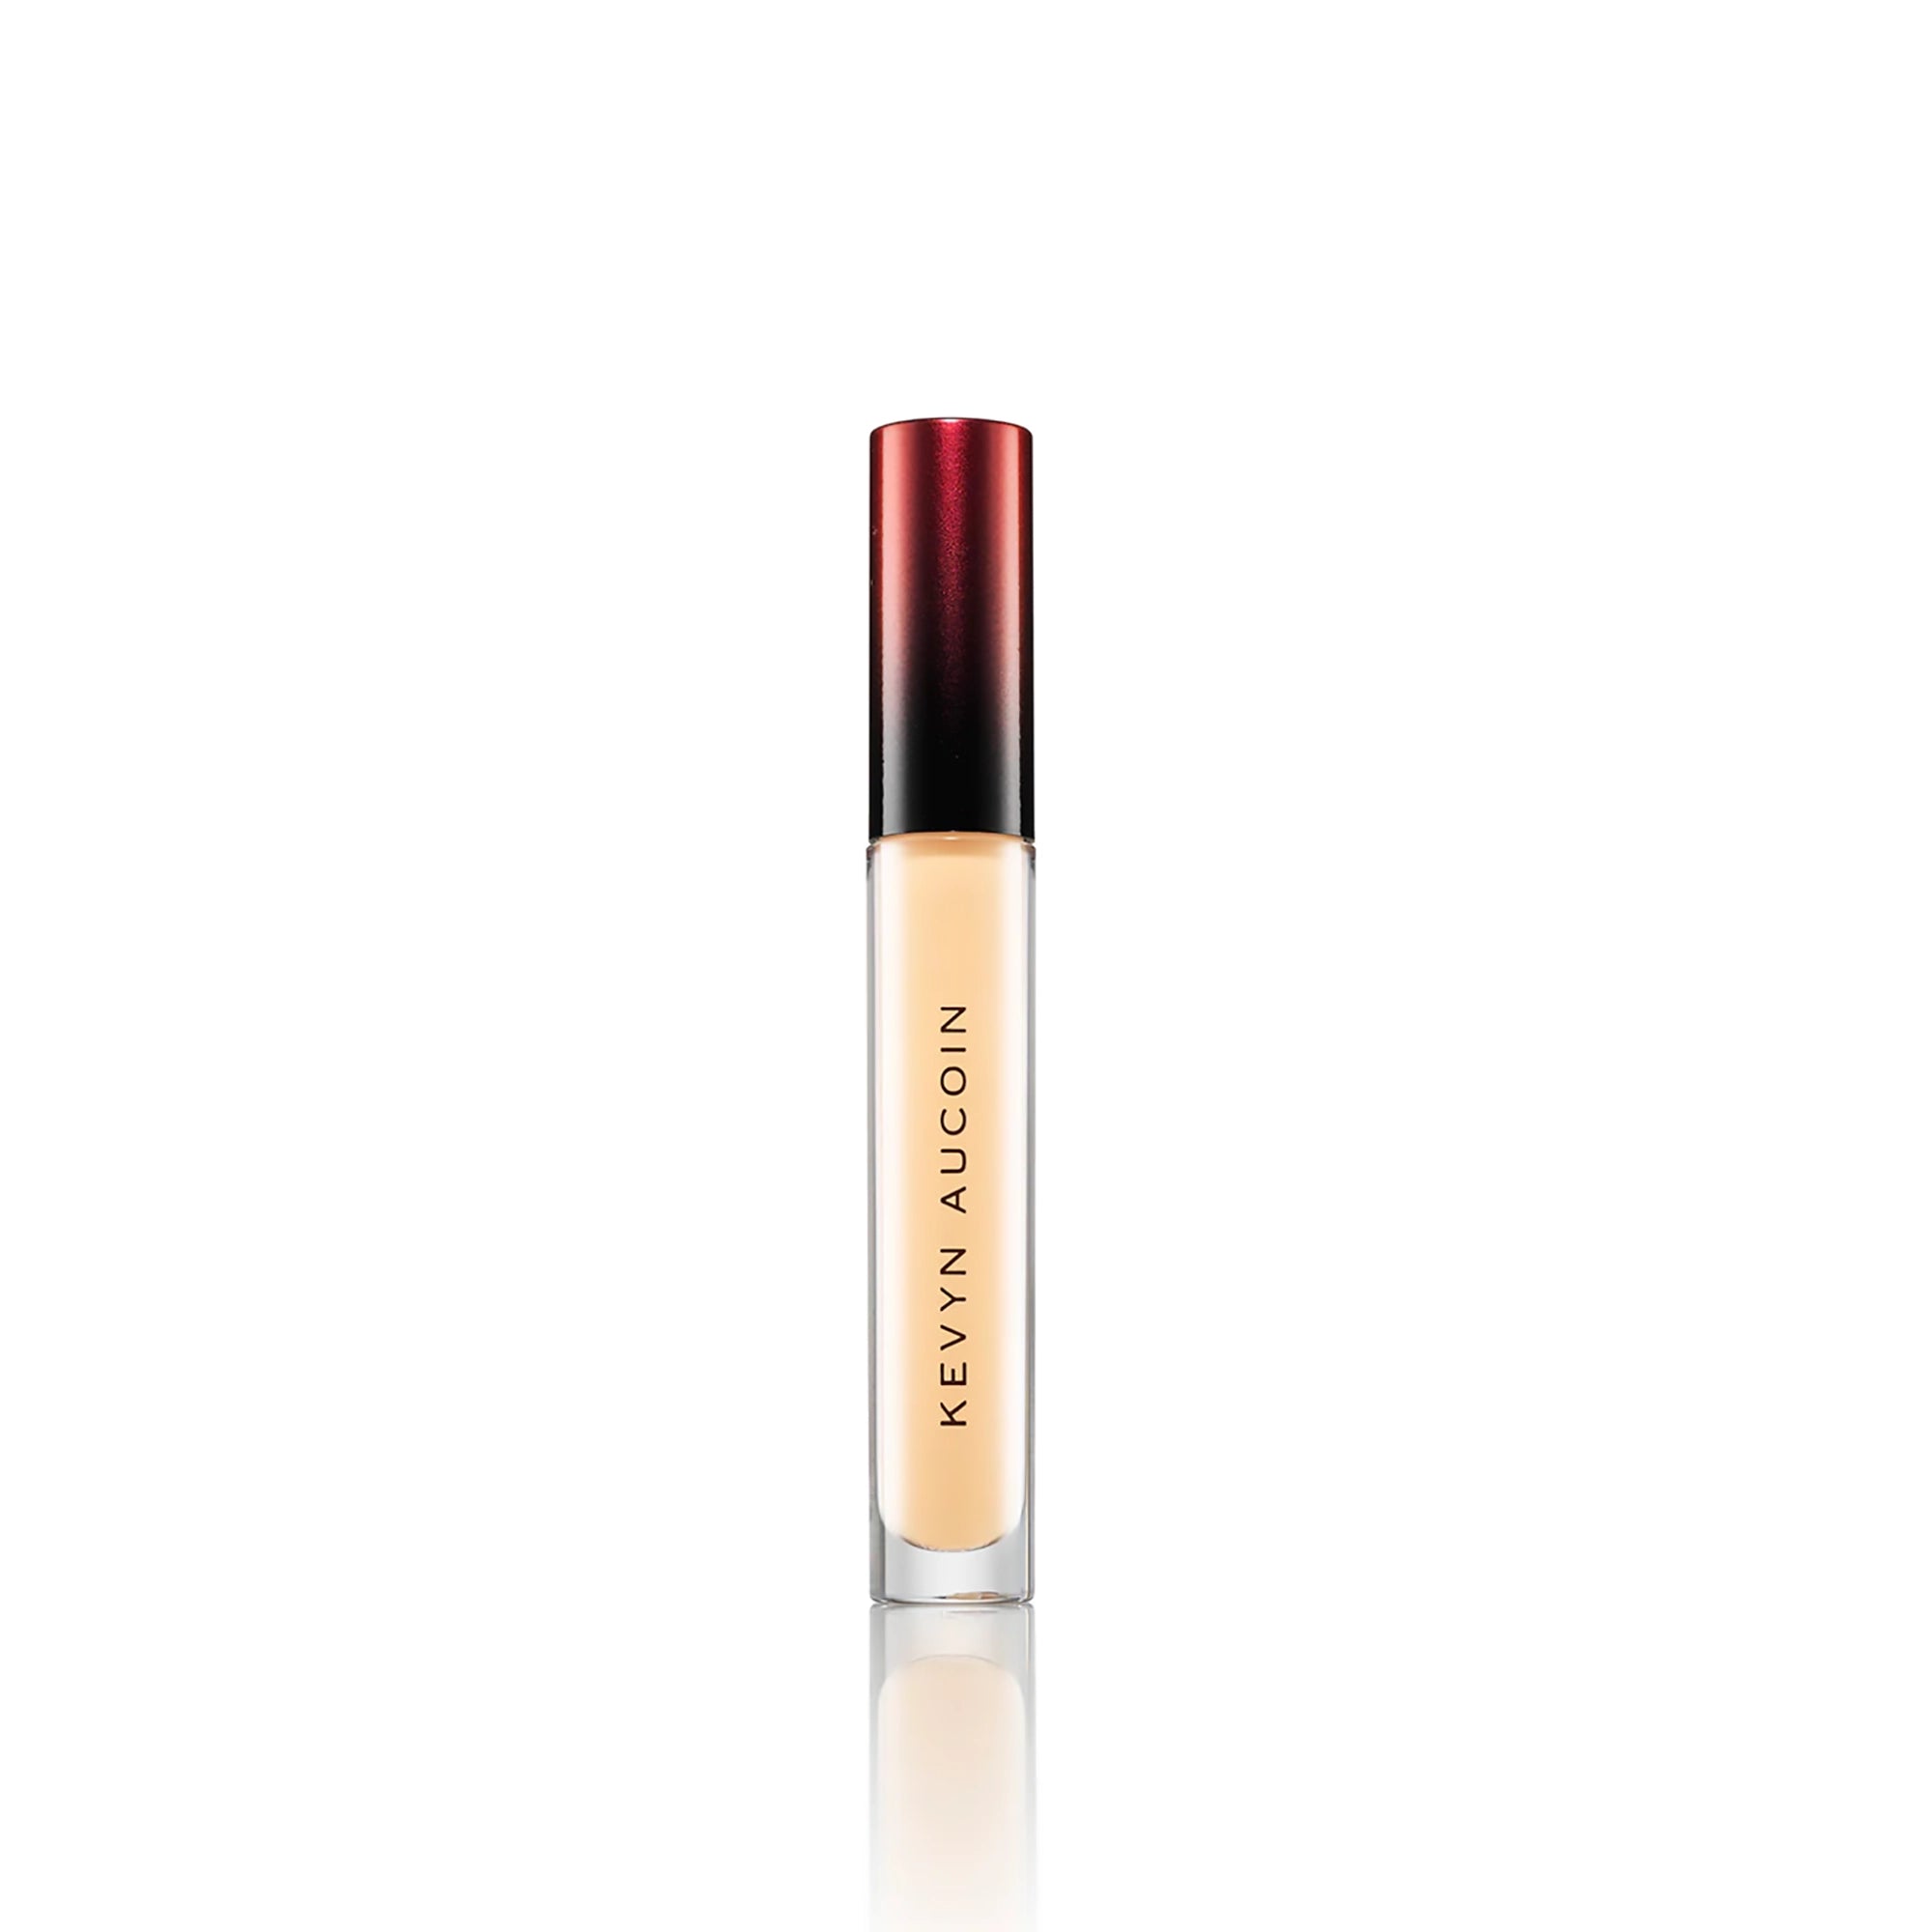 Kevyn Aucoin The Etherealist Super Natural Concealer / LIGHT 1